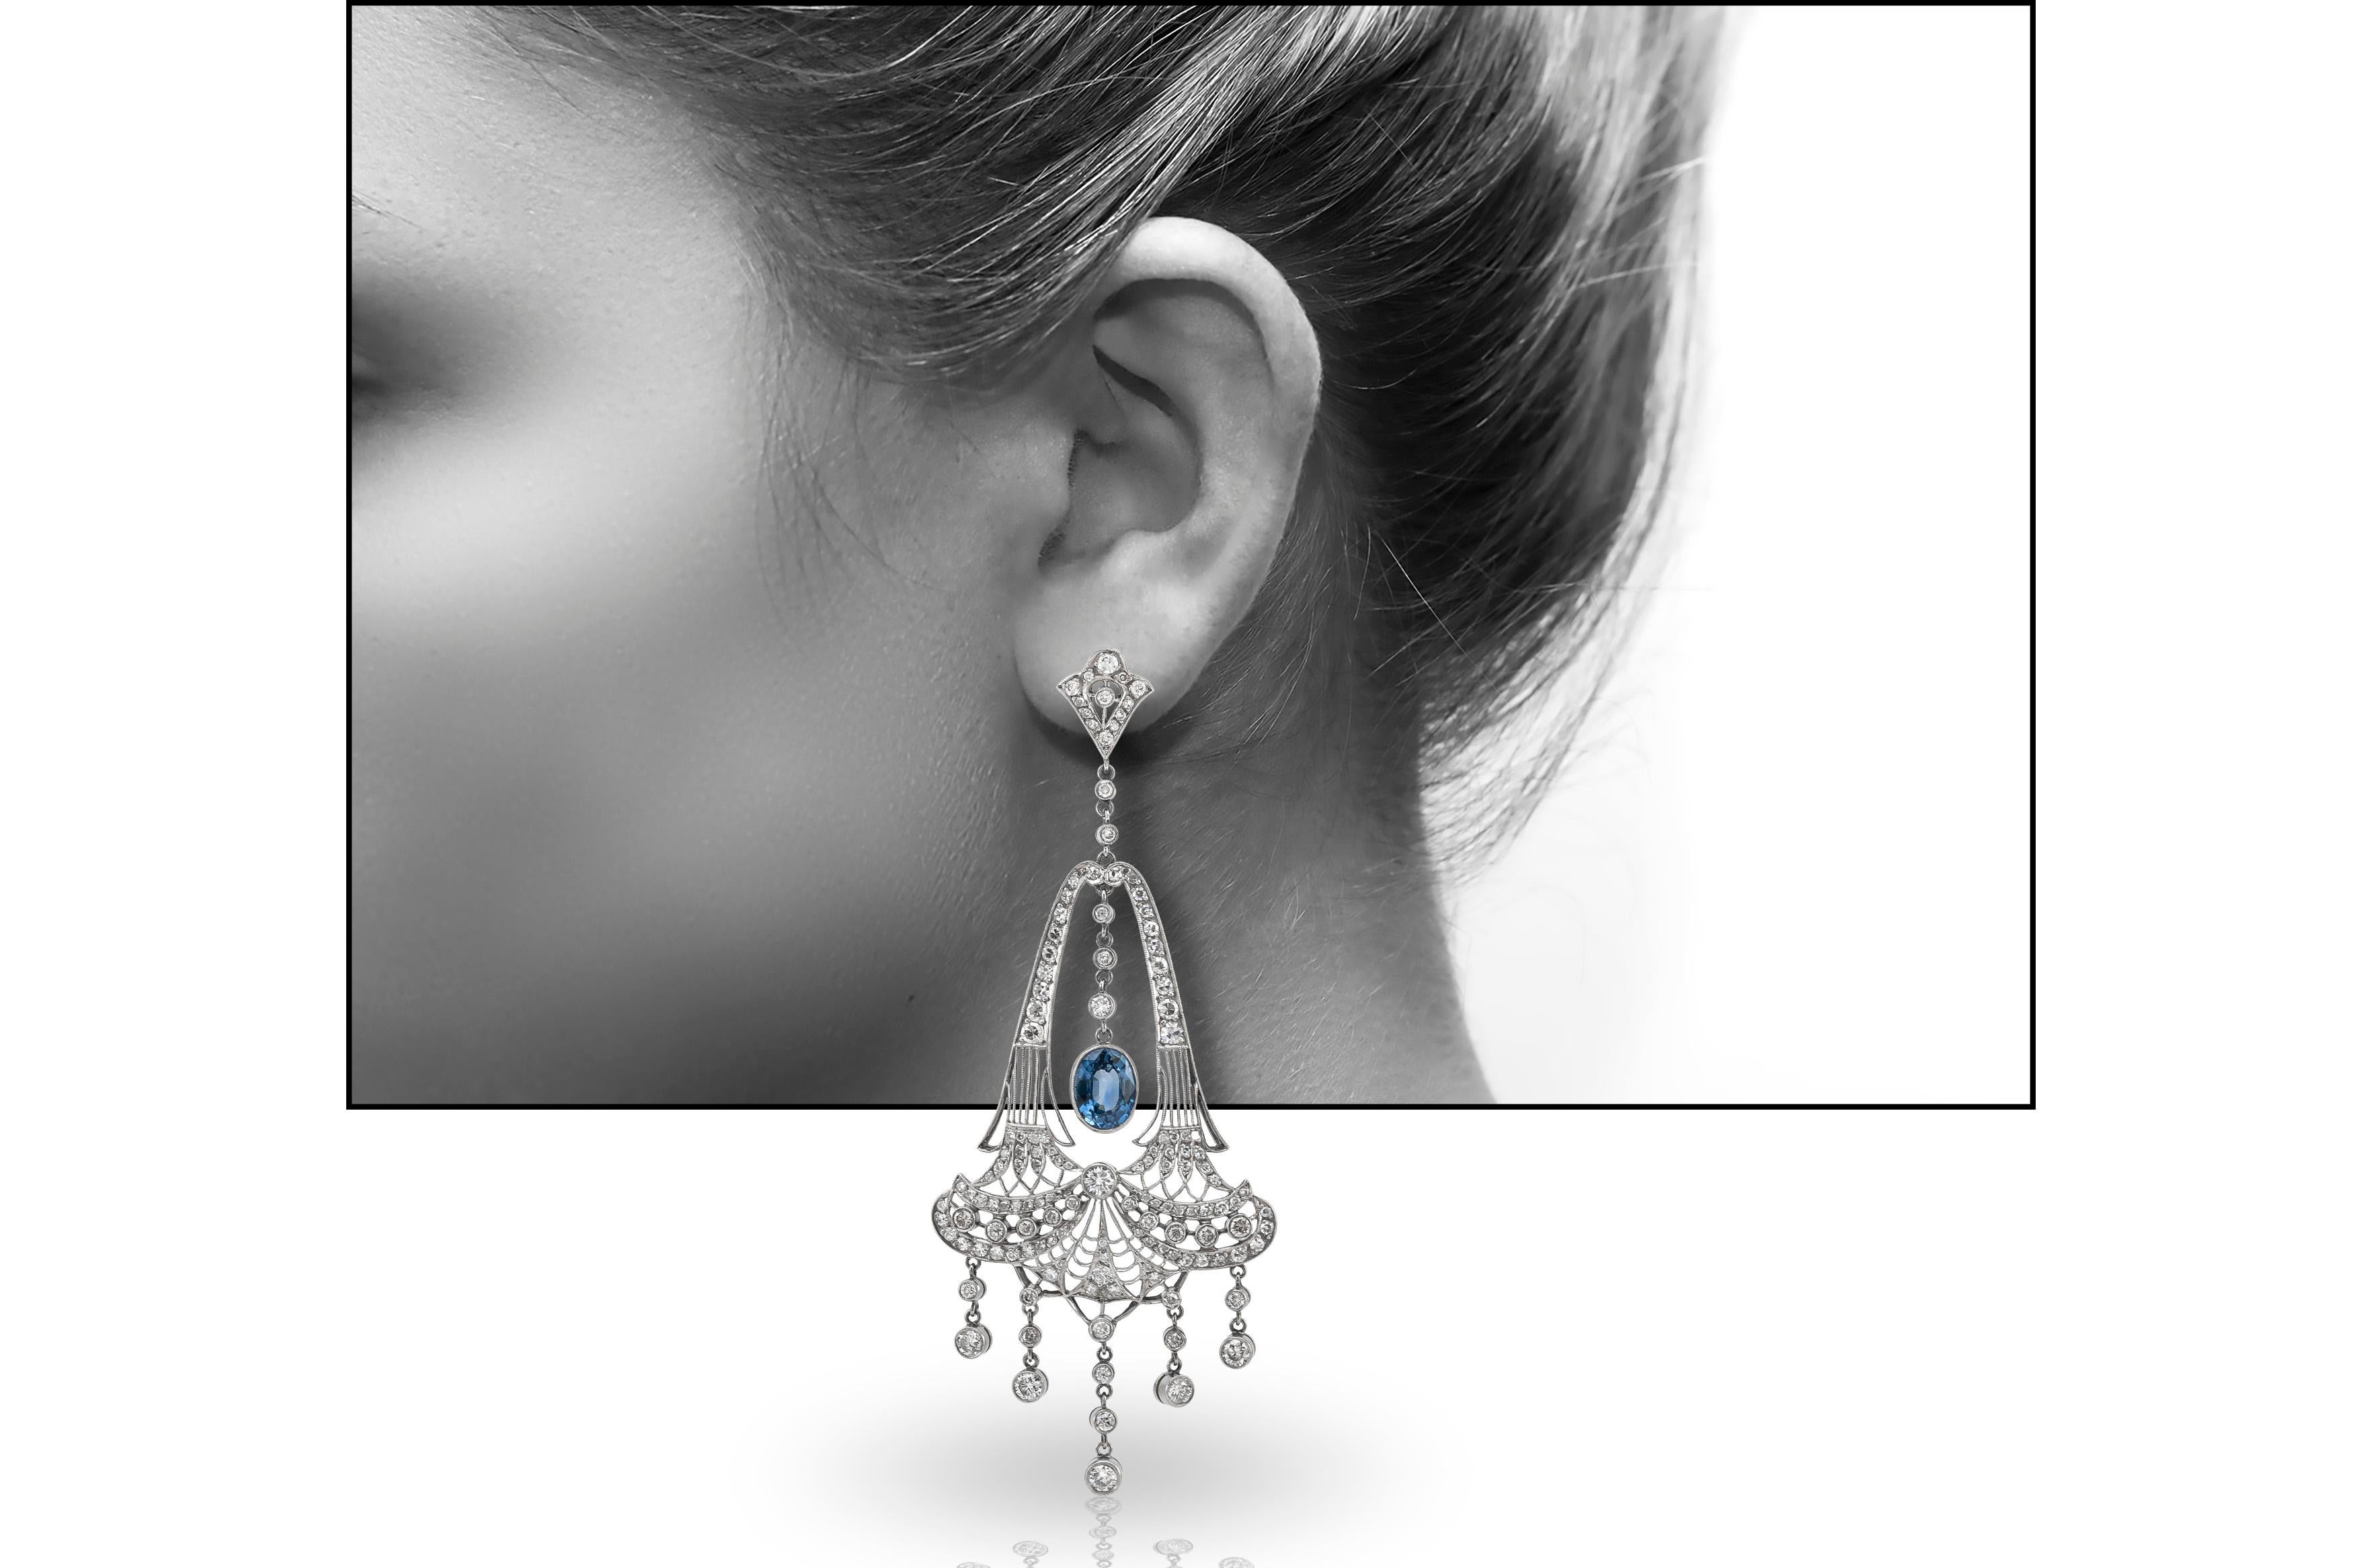 Chandelier drop earrings finely crafted in platinum.
Total diamond weight is approximately 5.00 CT.
The two center sapphire weighs an approximate 6.70 CT.
Gorgeous elegant statement earrings!